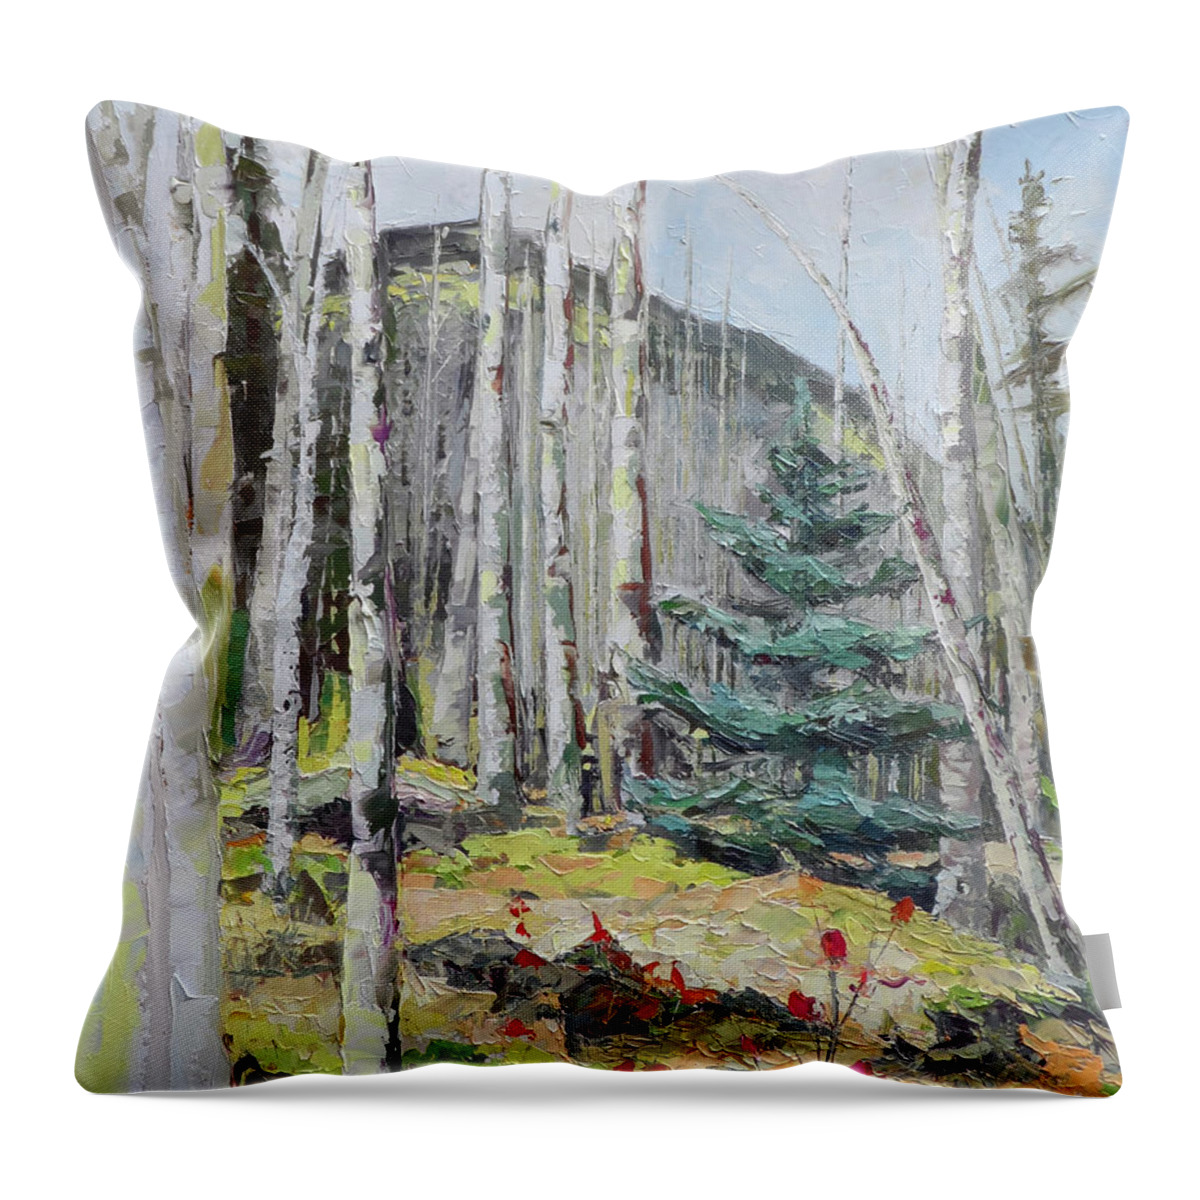 Aspen Throw Pillow featuring the painting Among the Aspen, 2018 by PJ Kirk